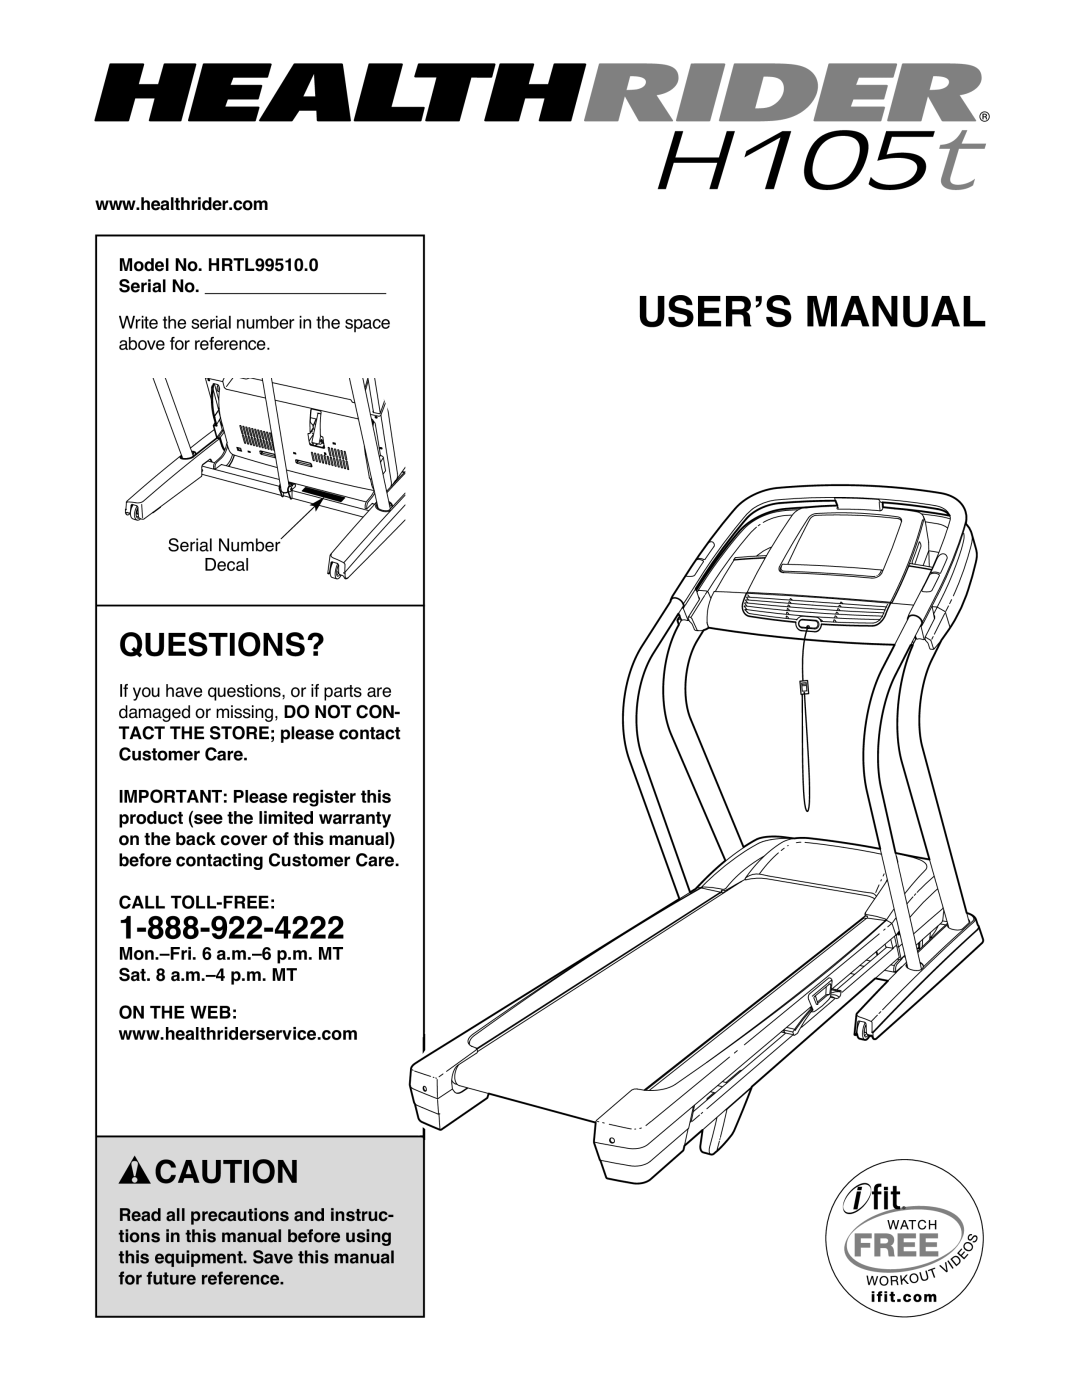 Healthrider HRTL99510.0 manual Questions?, 1CALL-888TOLL-922-FREE-4222, Userʼs Manual 